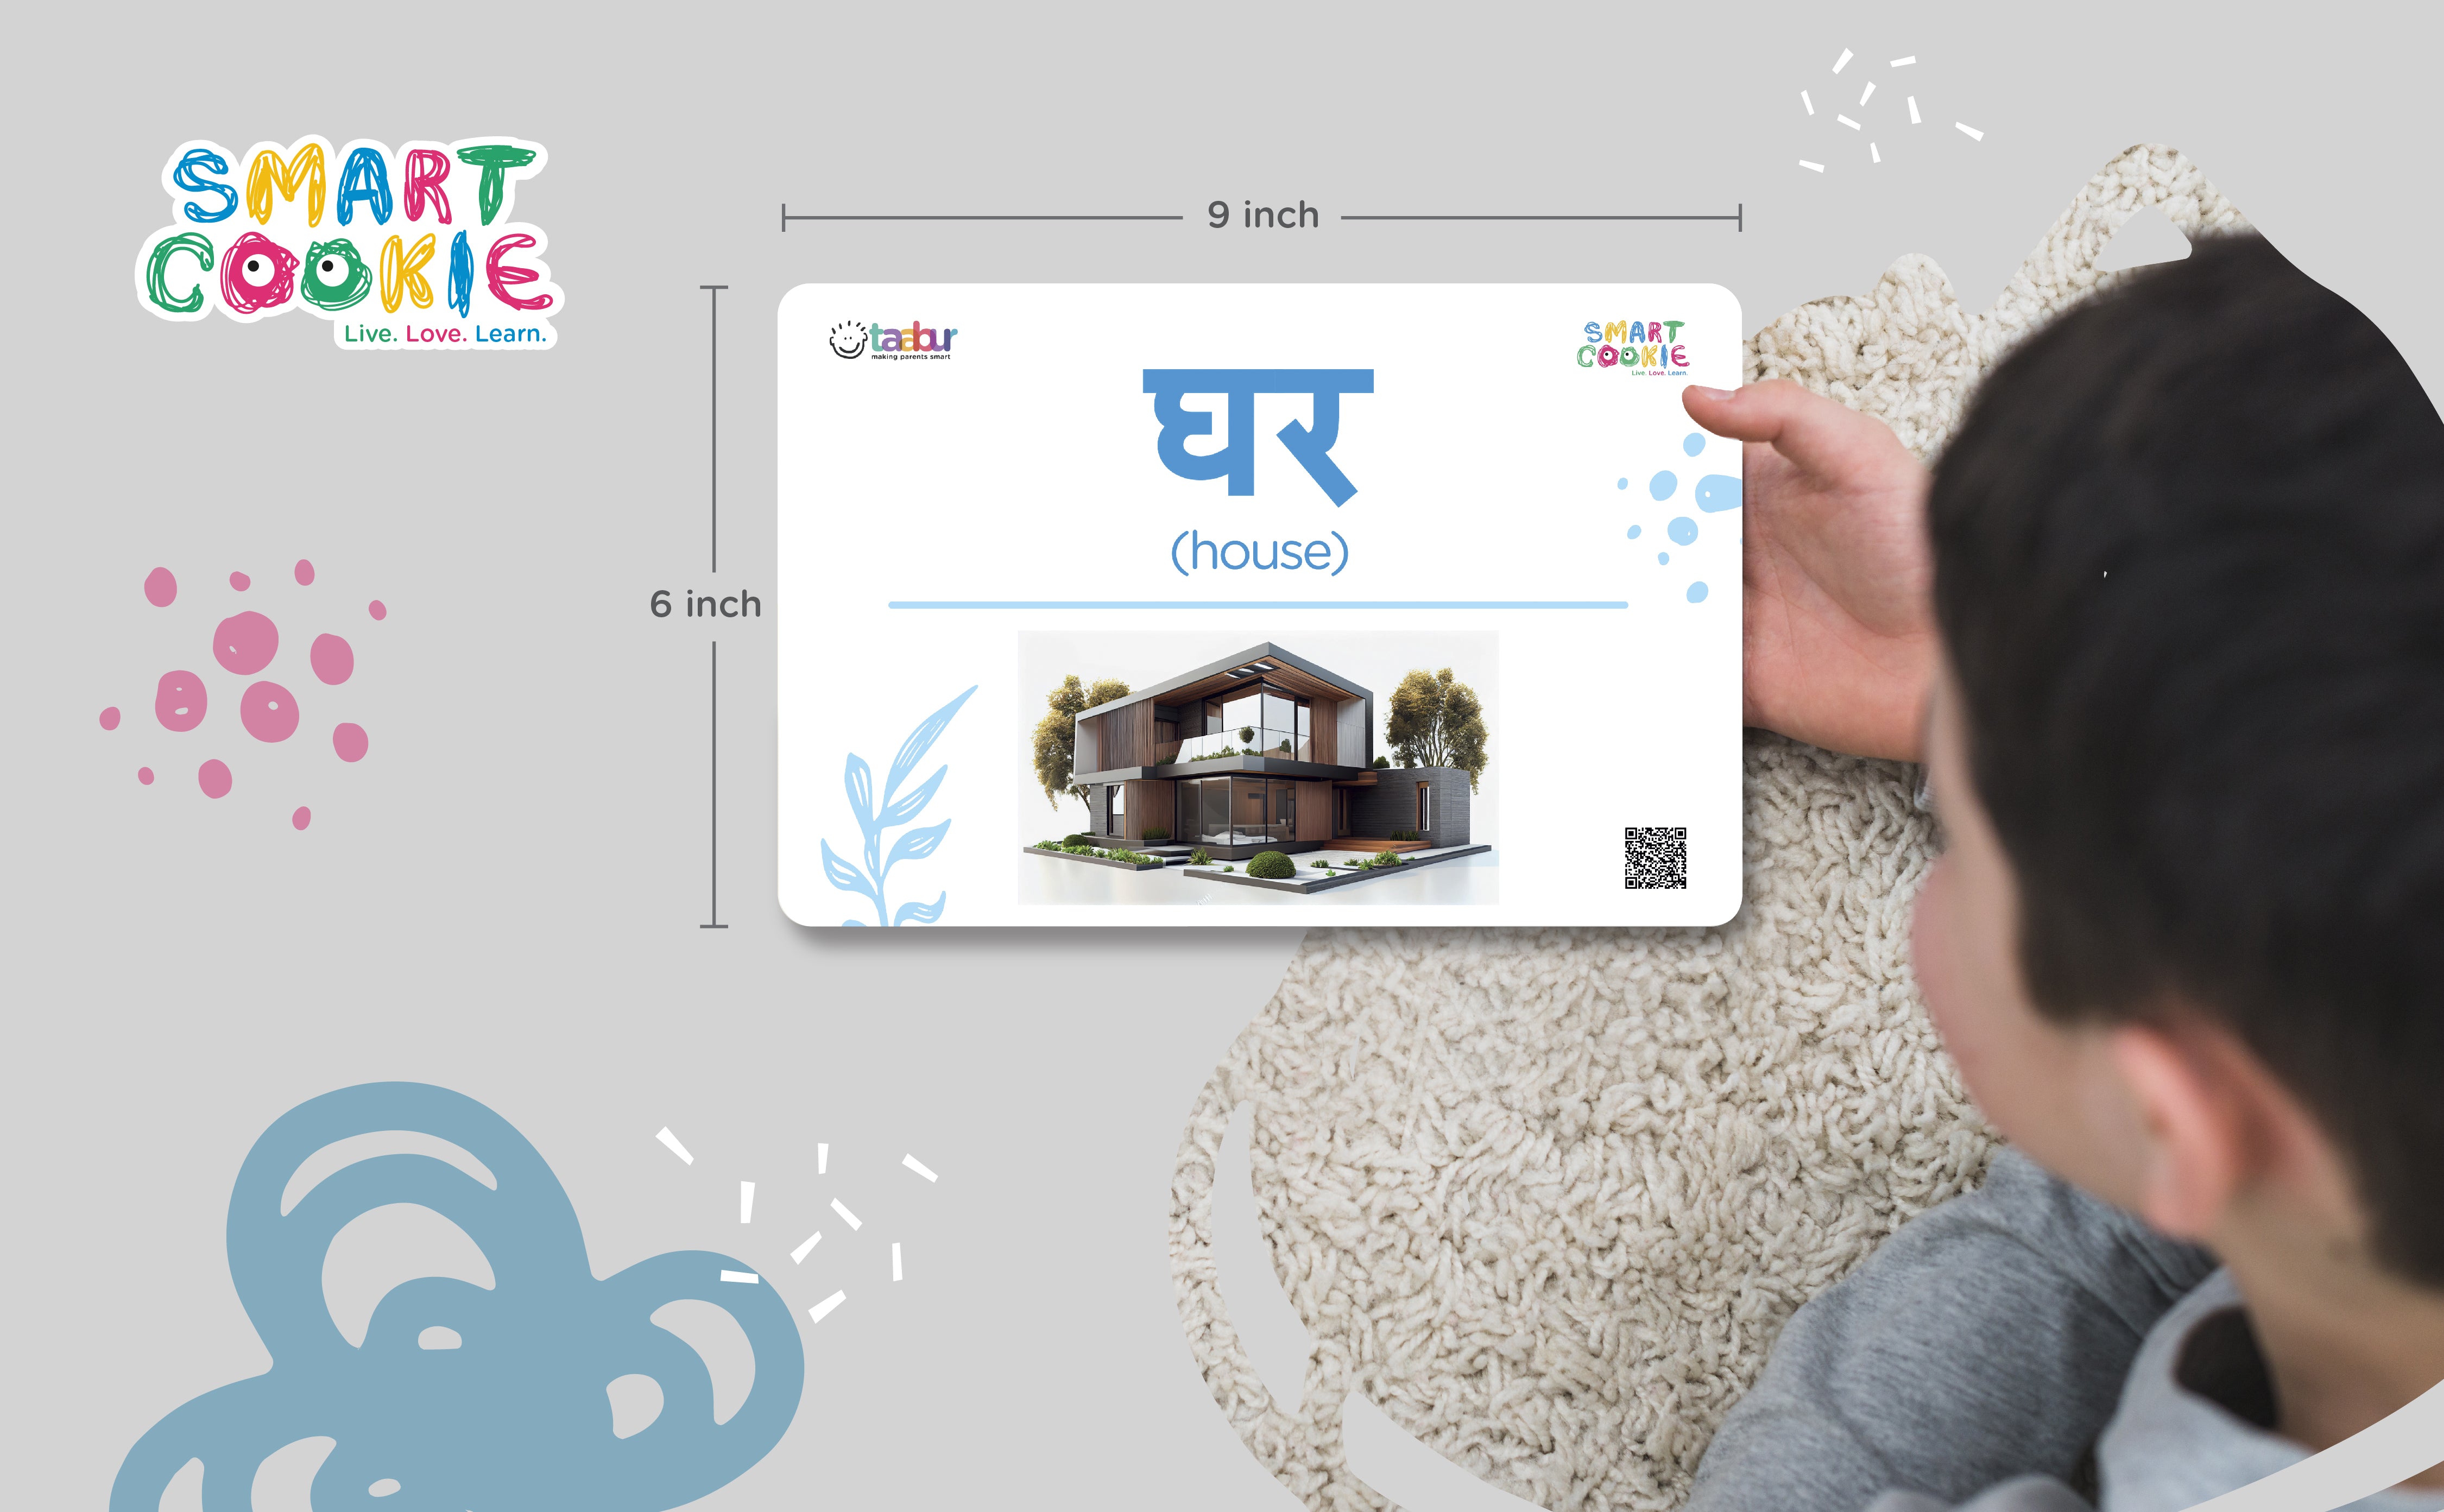 Hindi 2 Letter Words - Interactive Flash Cards for Children (40 Cards) - for Kids Aged 4 to 6 Years Old